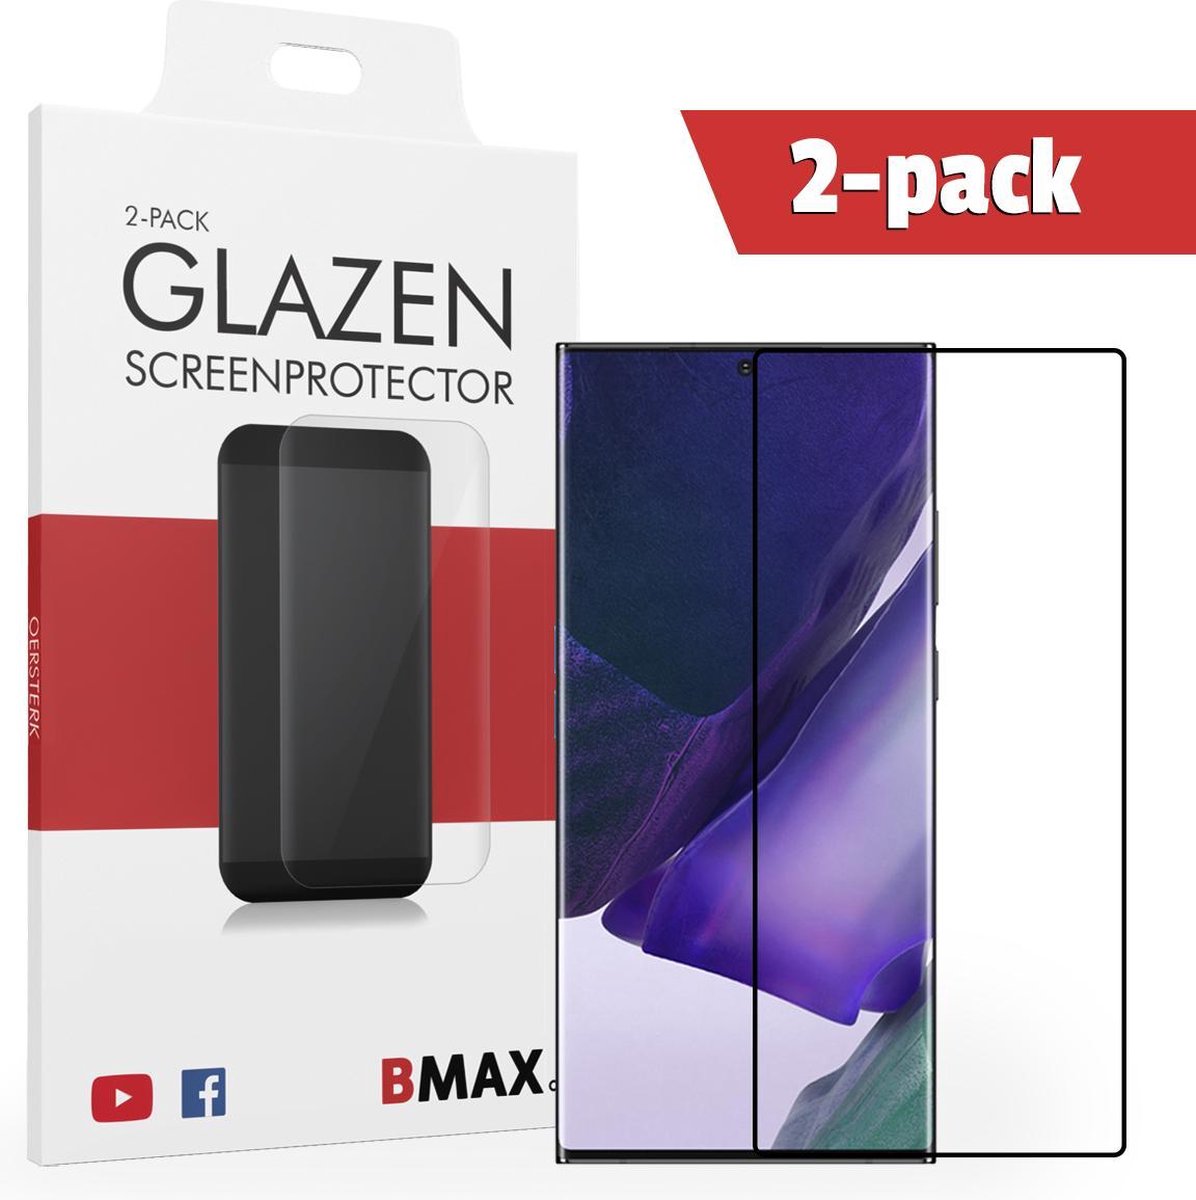 2-pack Bmax Samsung Note 20 Ultra Screenprotector - Glass - Full Cover 5d - Black